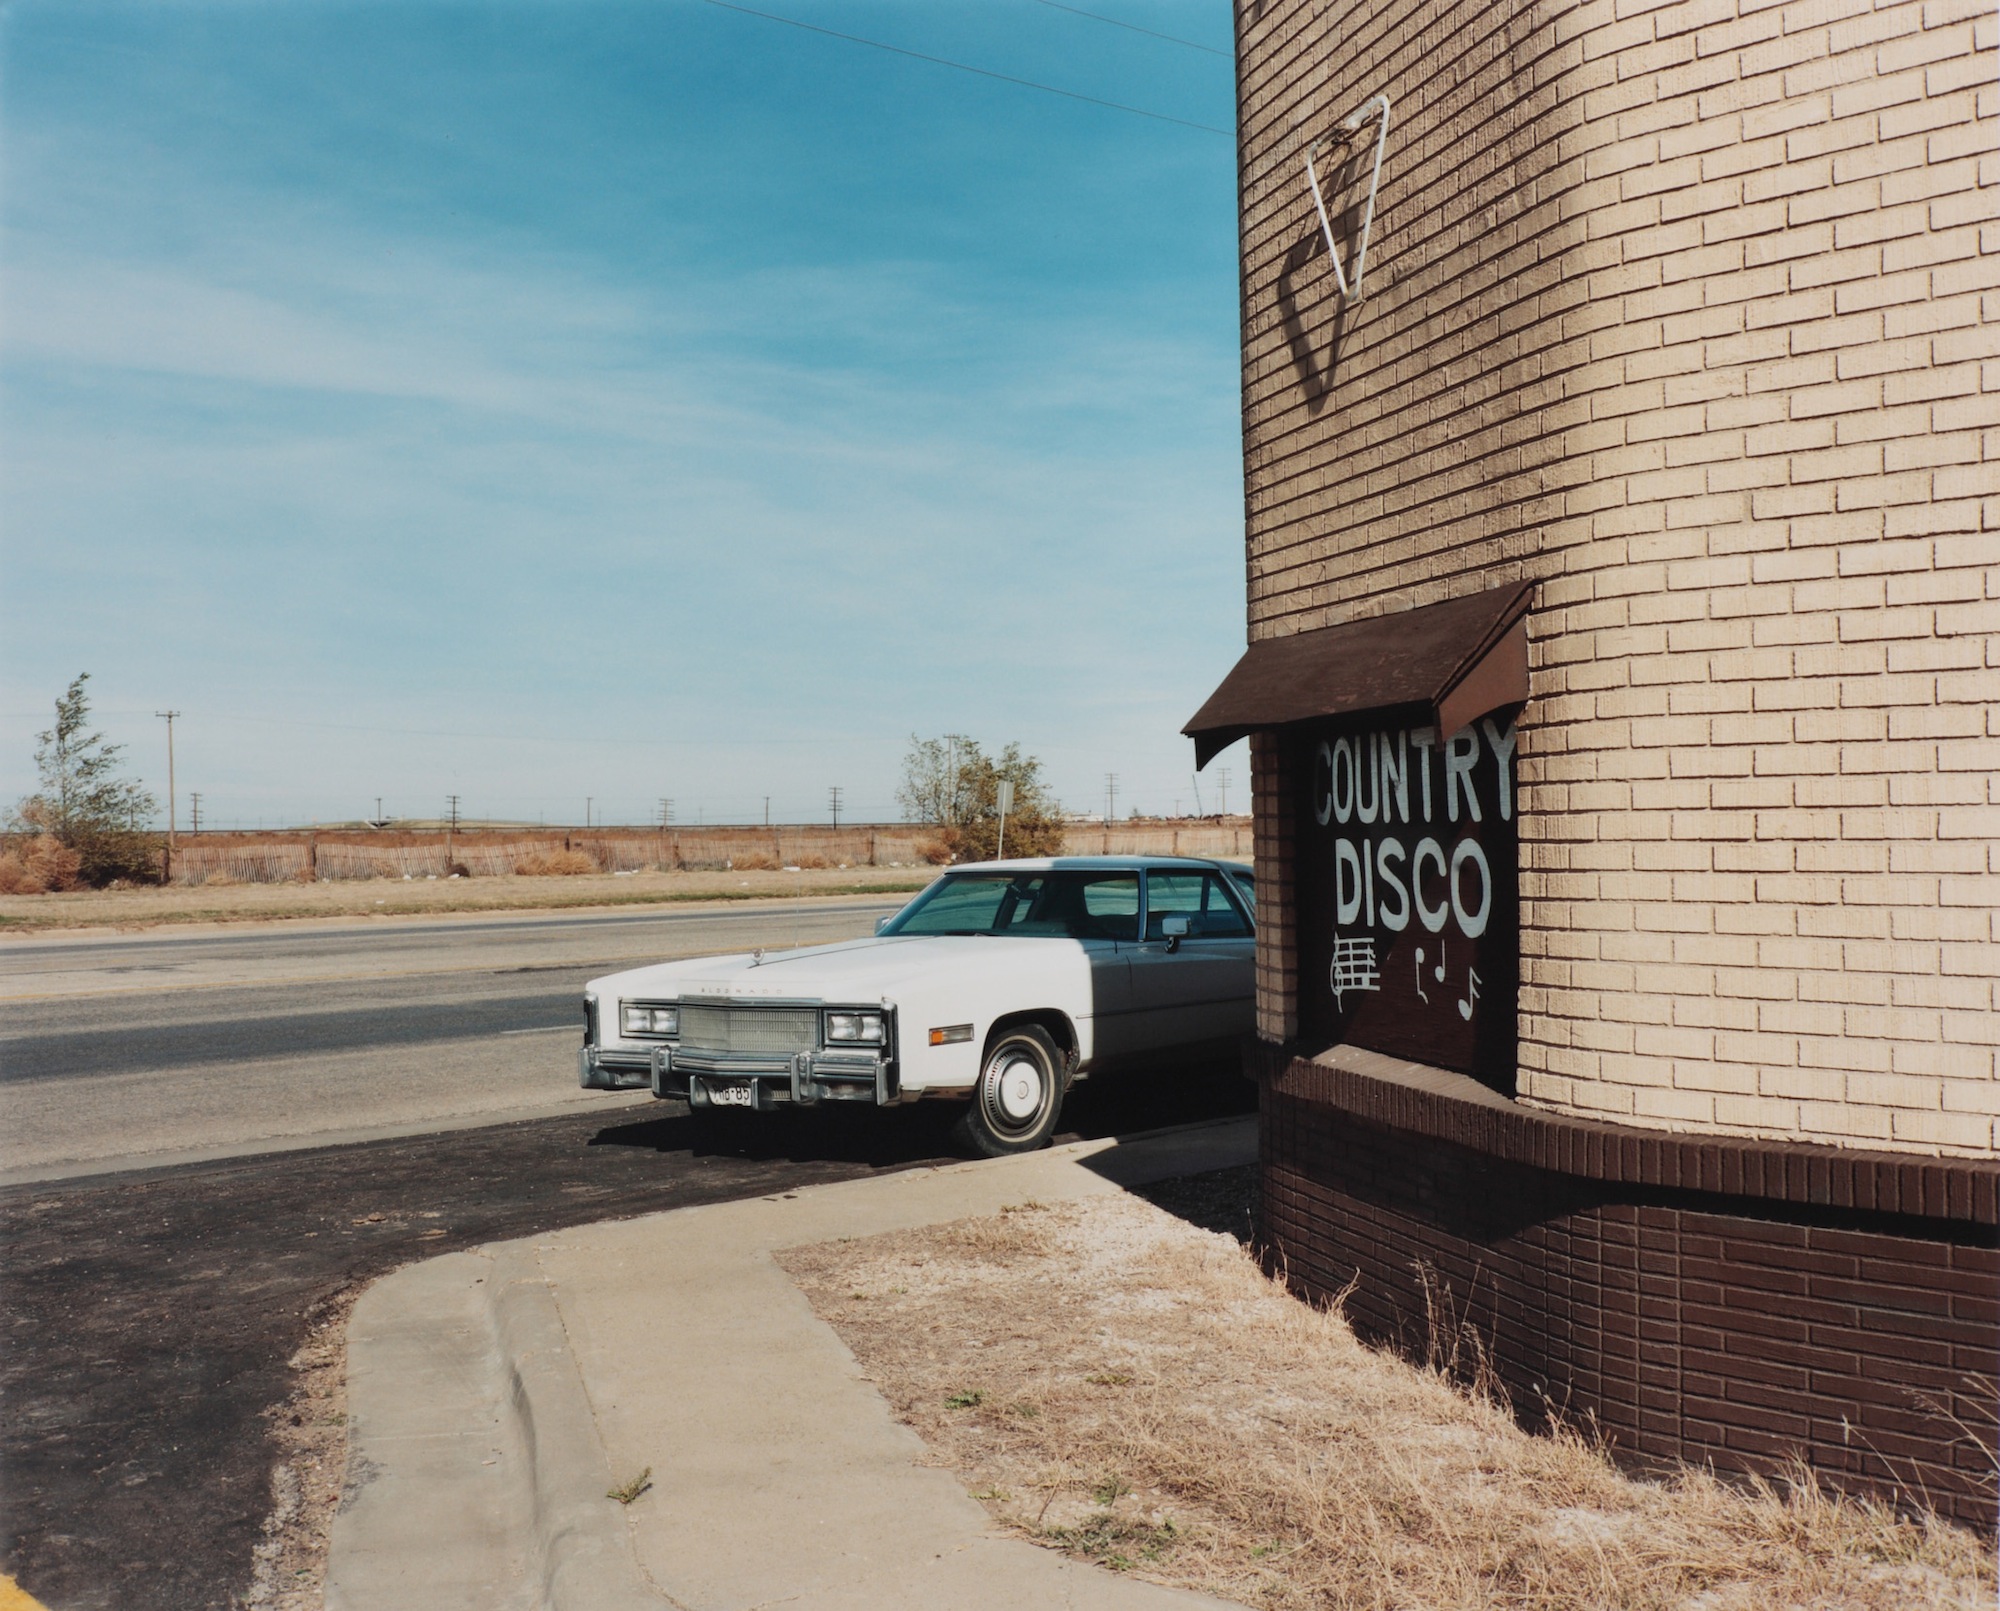 PHOTO: Ft. Worth-Dallas Club, next to the Pantex nuclear weapons plant, Carson County, Texas, 1985.